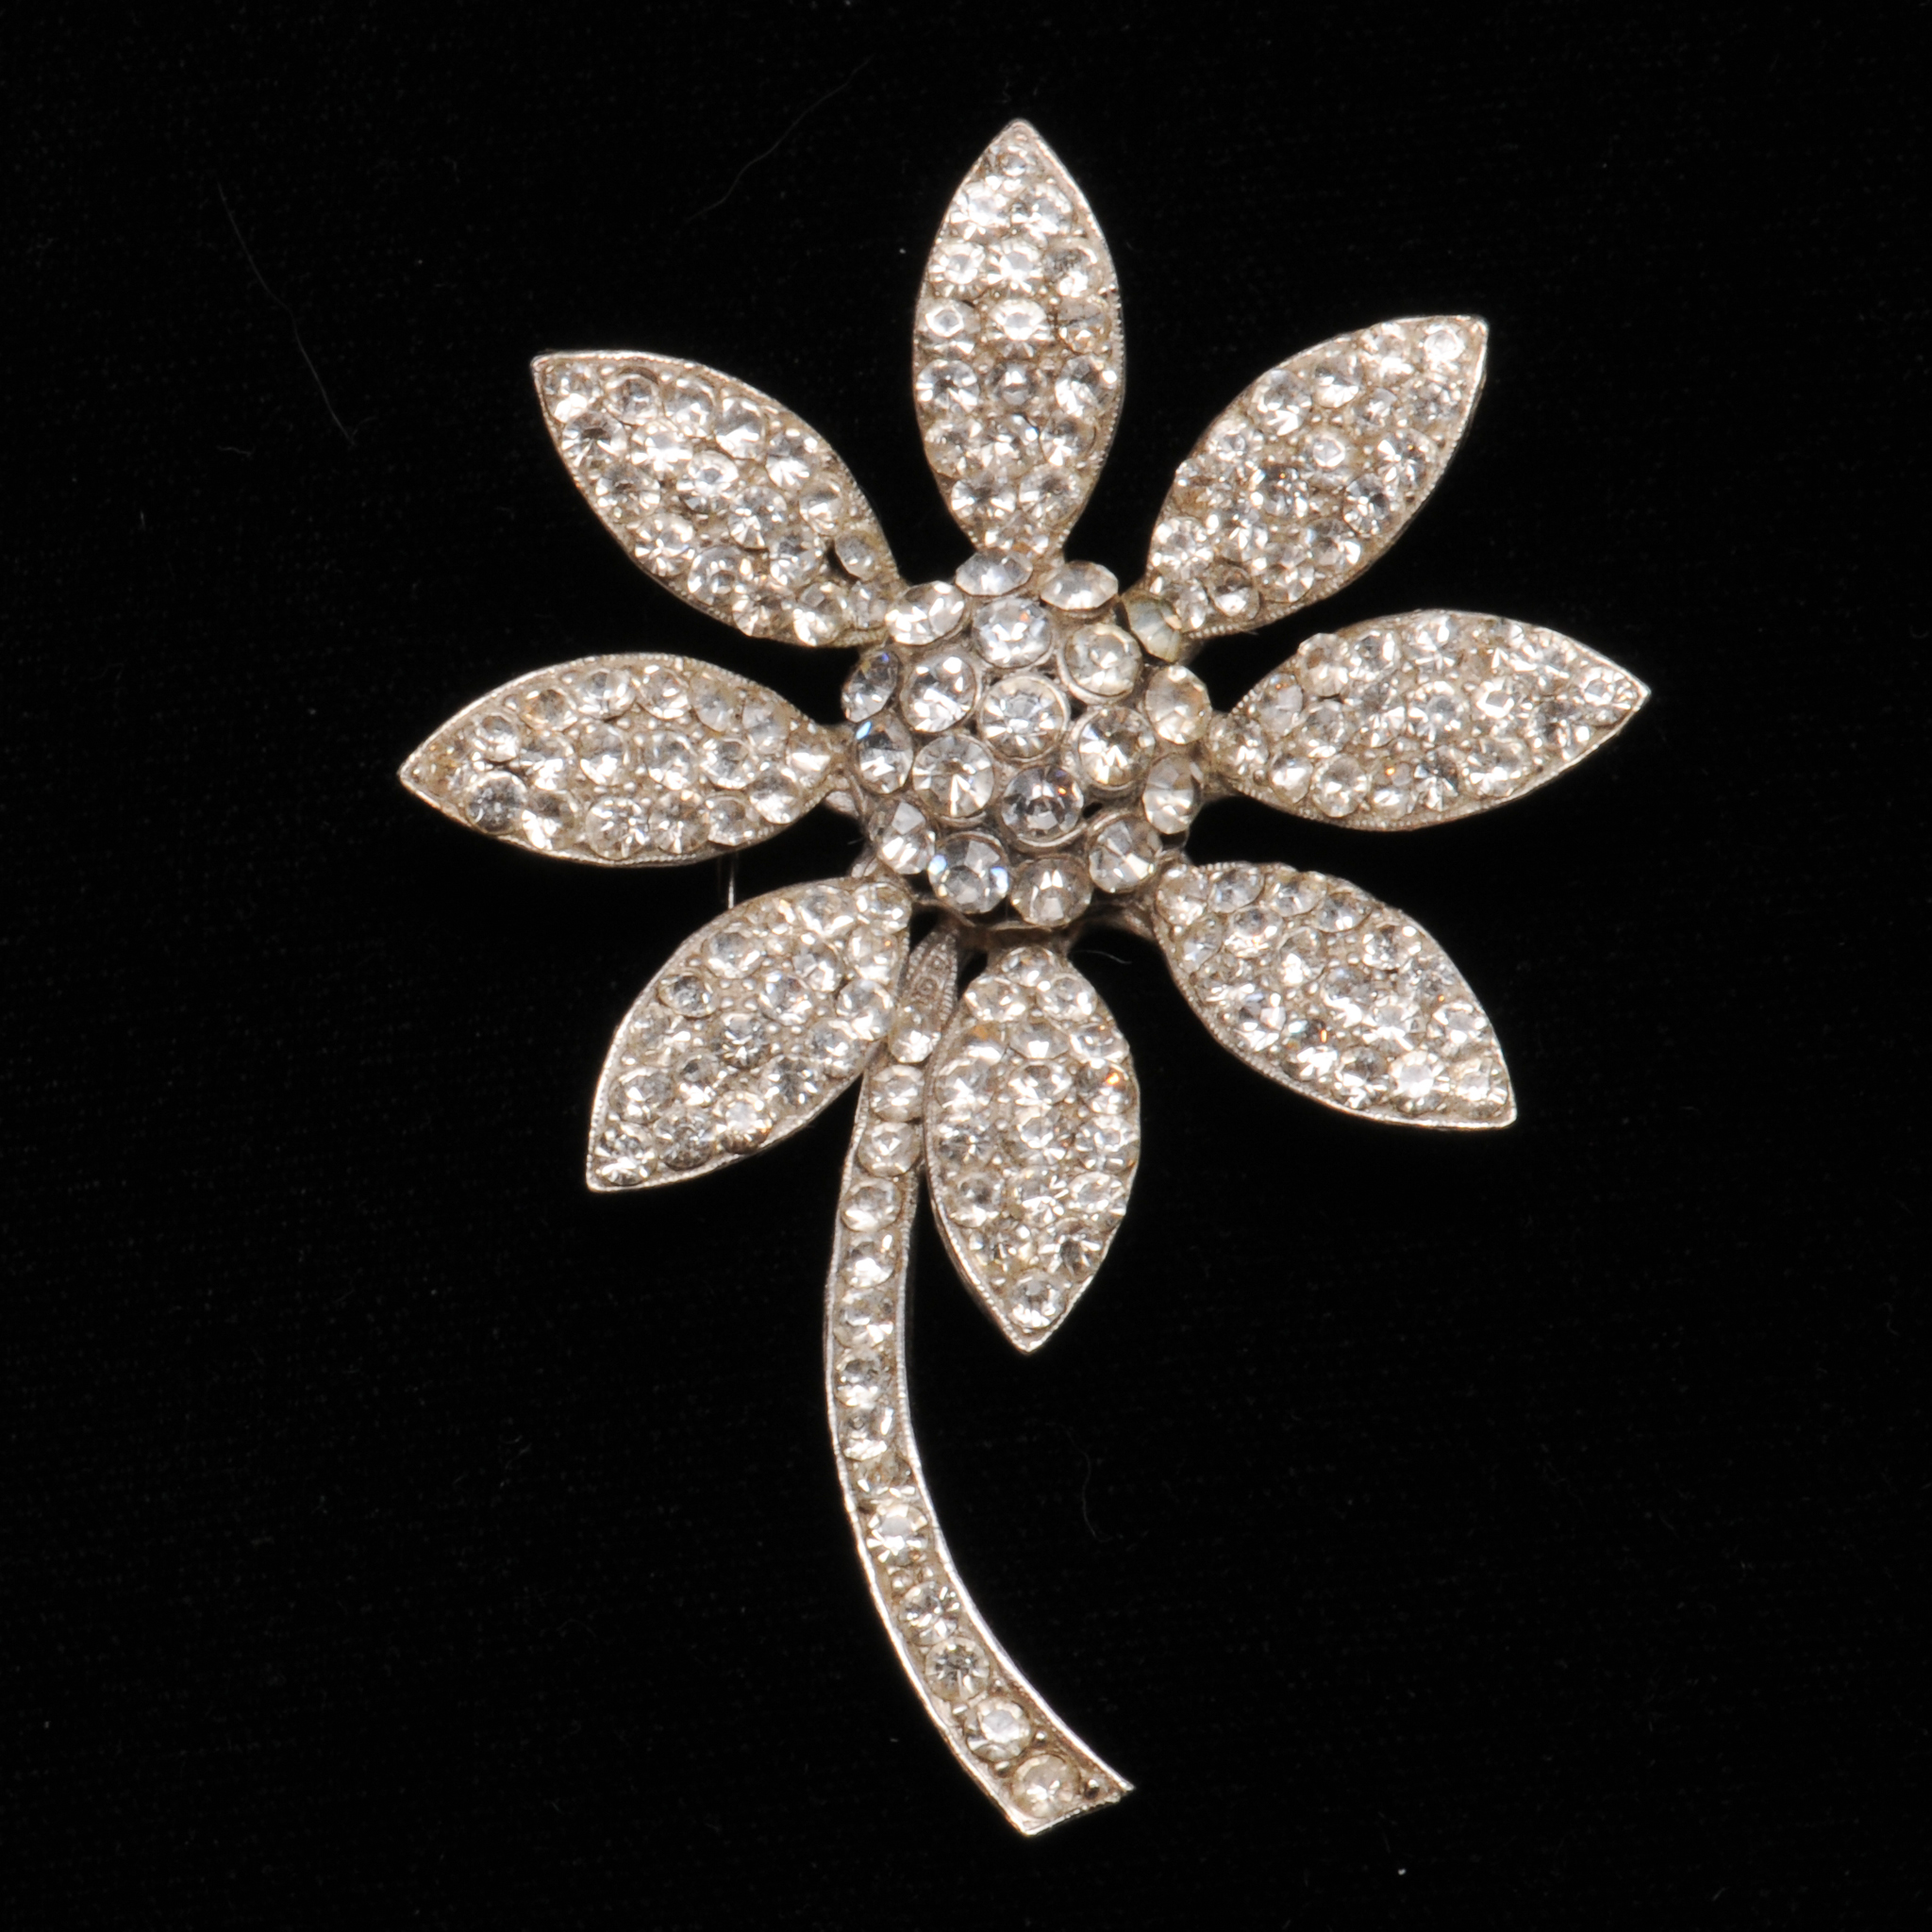 Weiss+Dazzling+Rhinestone+Daisy+Pin+Brooch picture 3